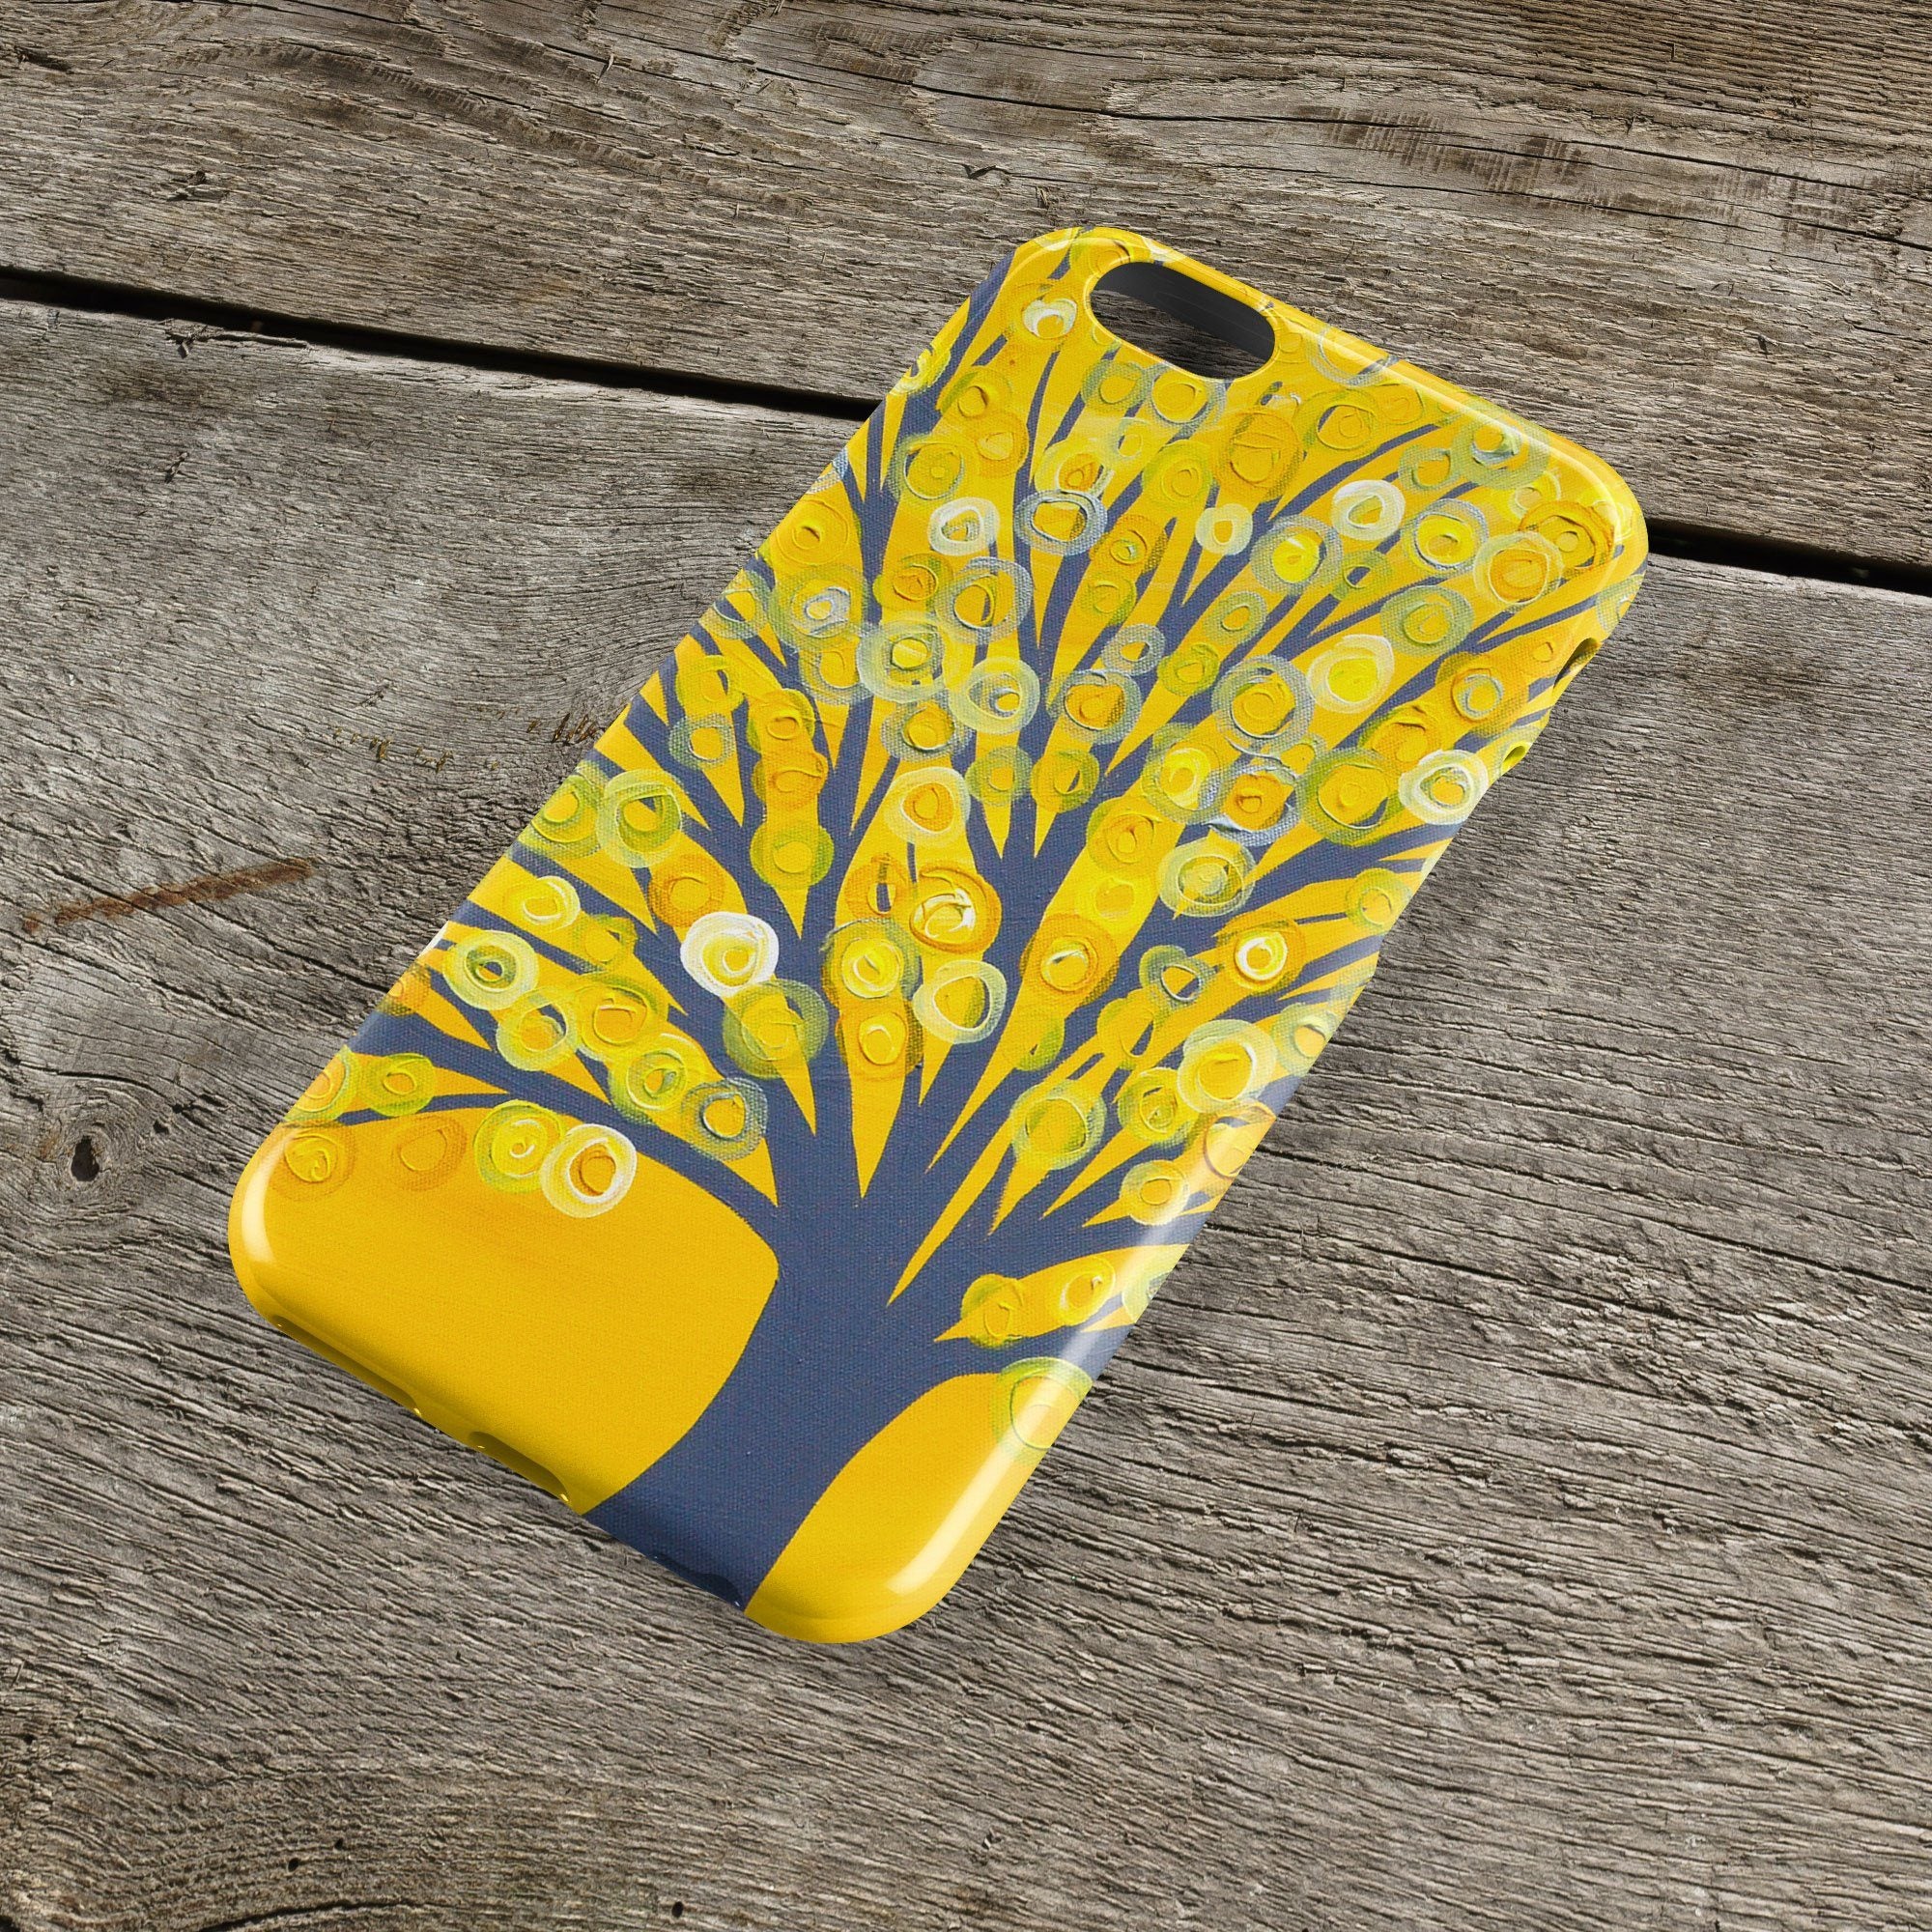 Yellow & Grey Tree iPhone Case - Louise Mead